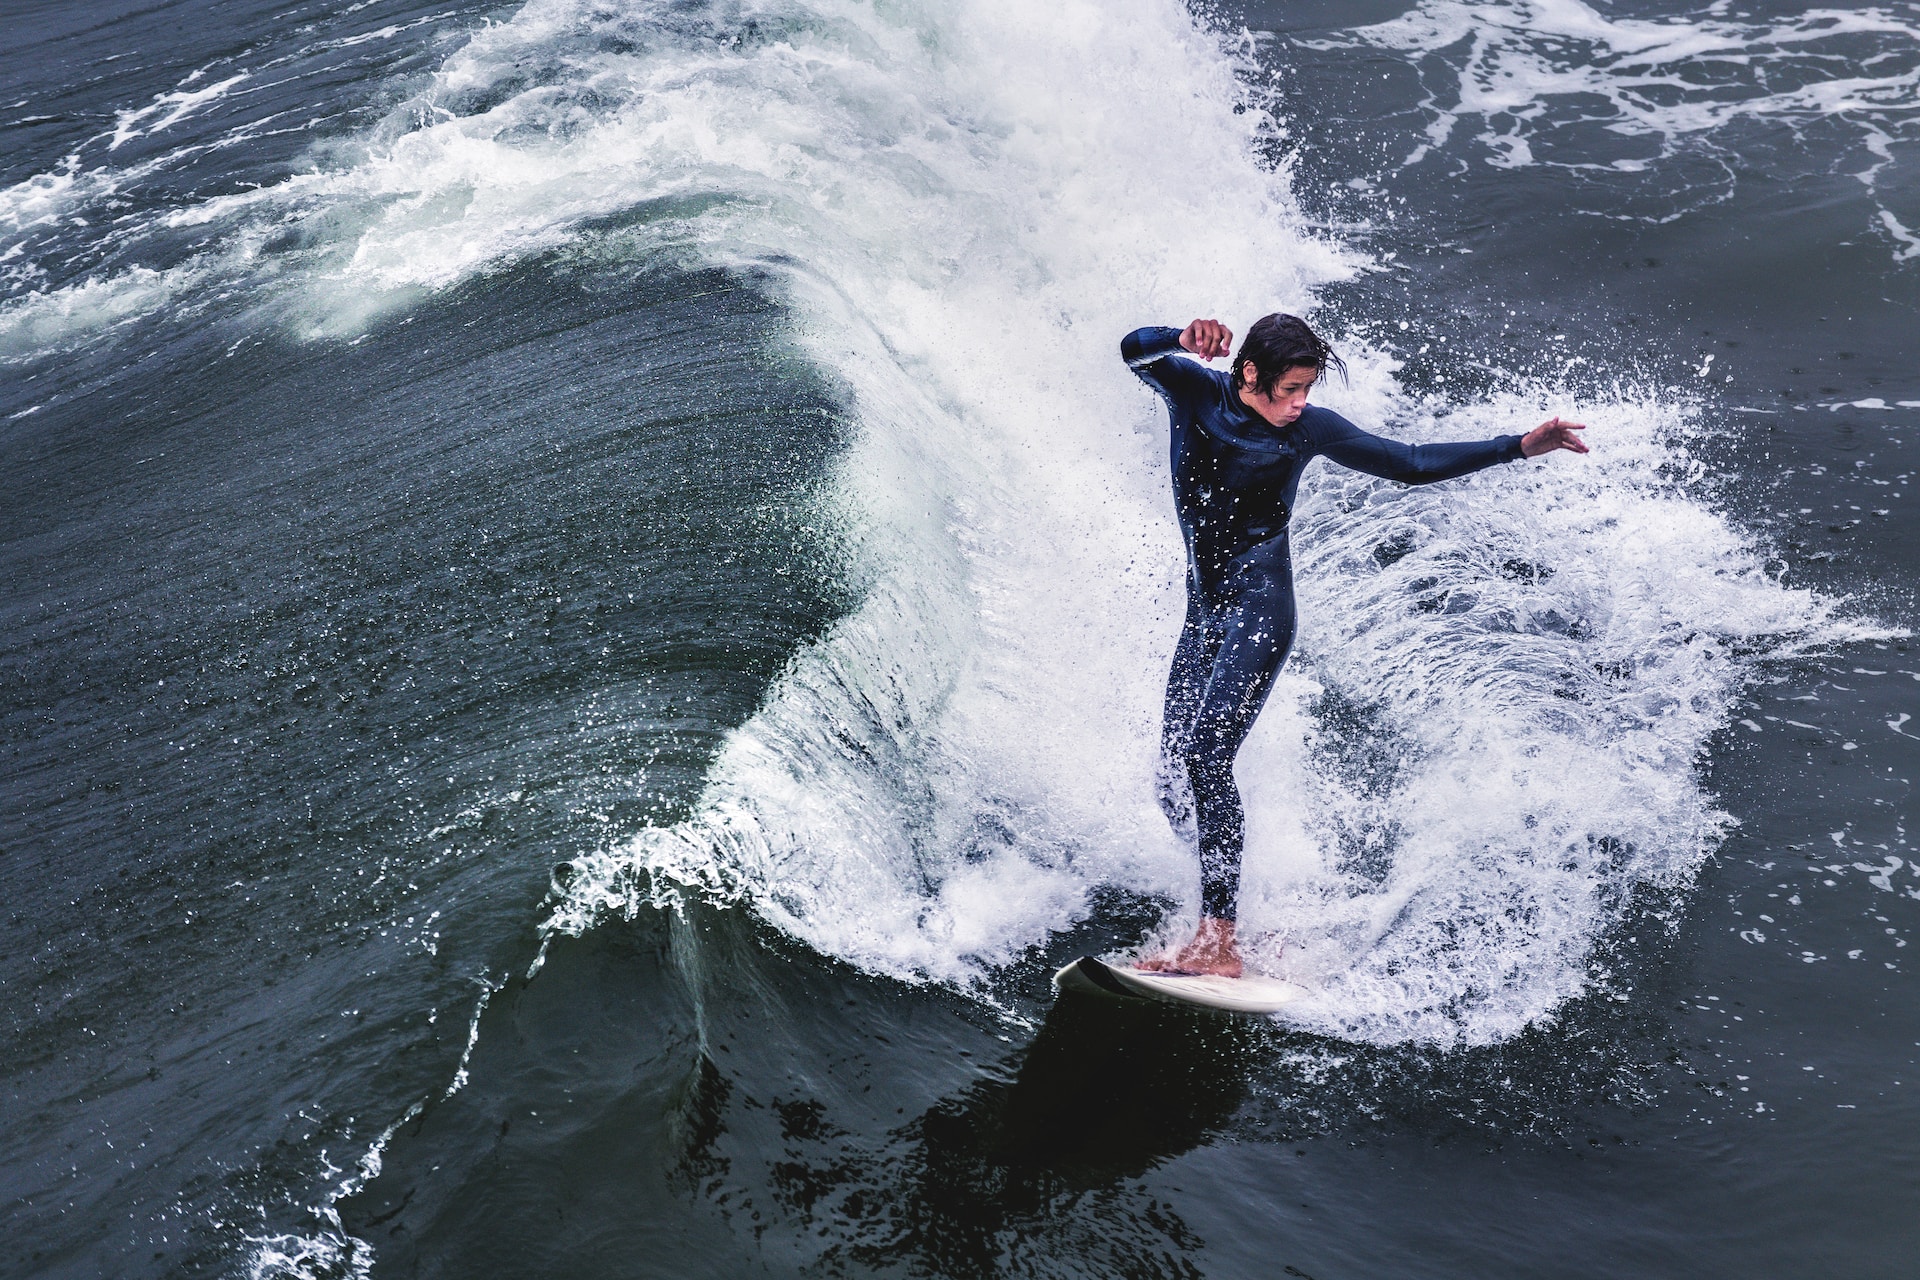 the image shows a male surfer on the wave 